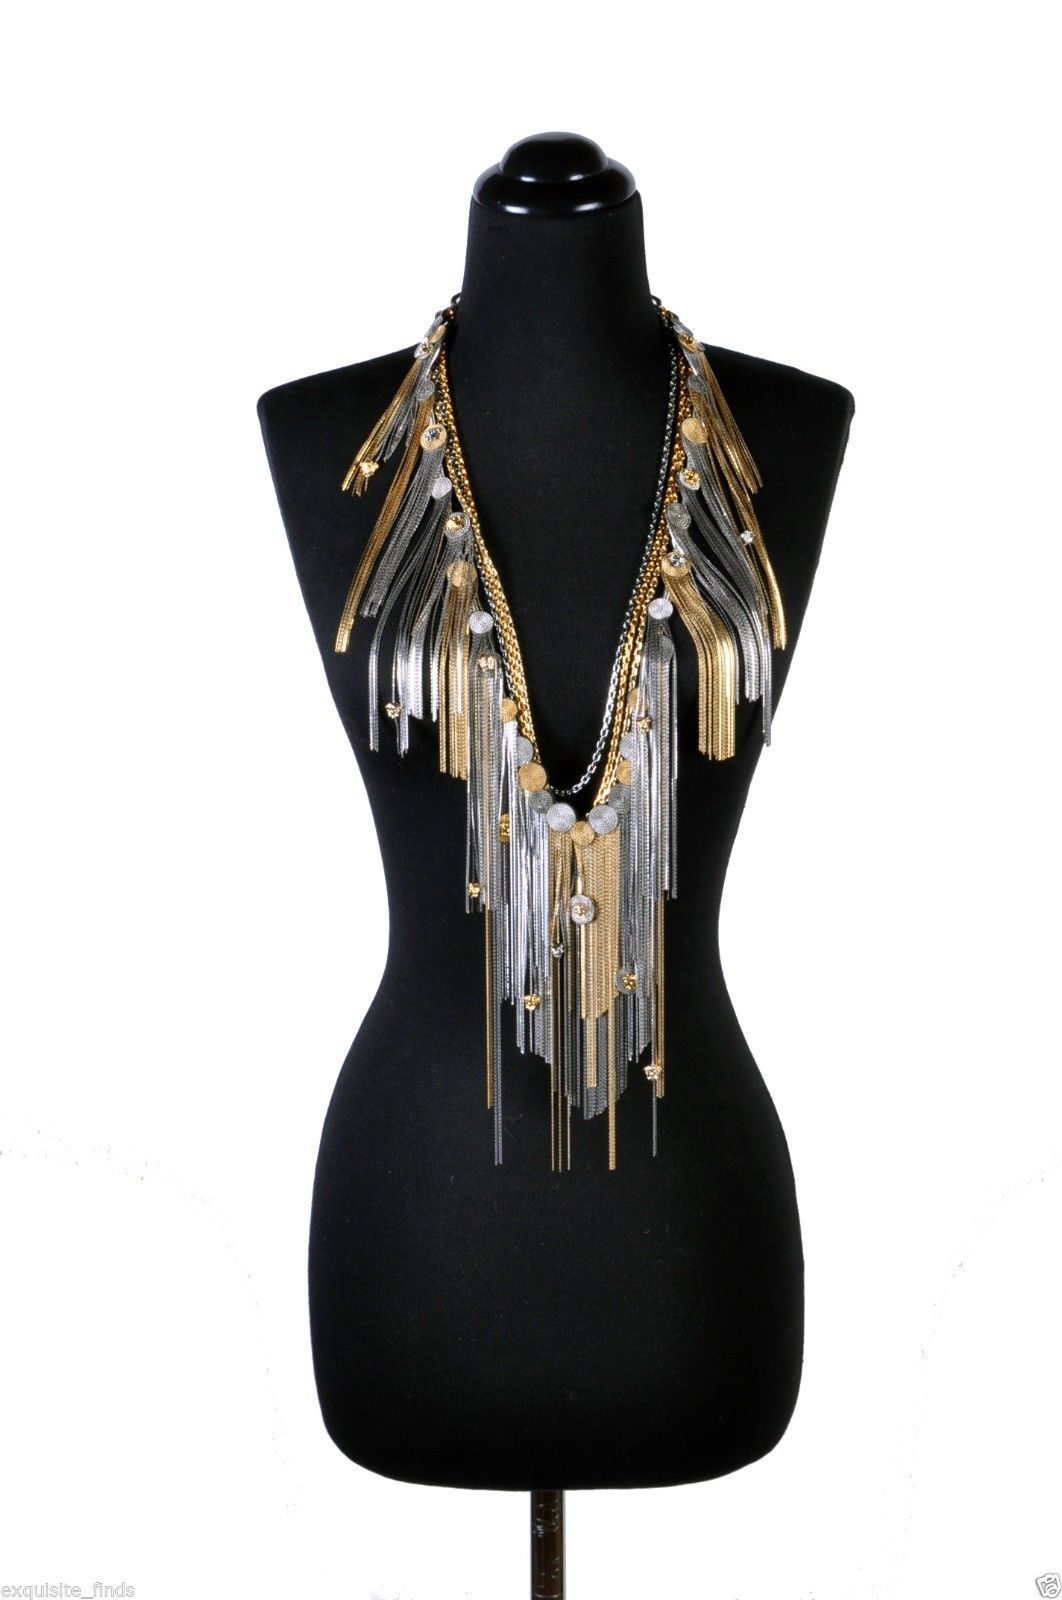 VERSACE

Metallic necklace featuring gold-tone and silver-tone long fringes with circular details on a gold-tone chain with a clip fastening and a small logo coin.

Closes with adjustable chain. 

Composition: 100 % metal

Made in